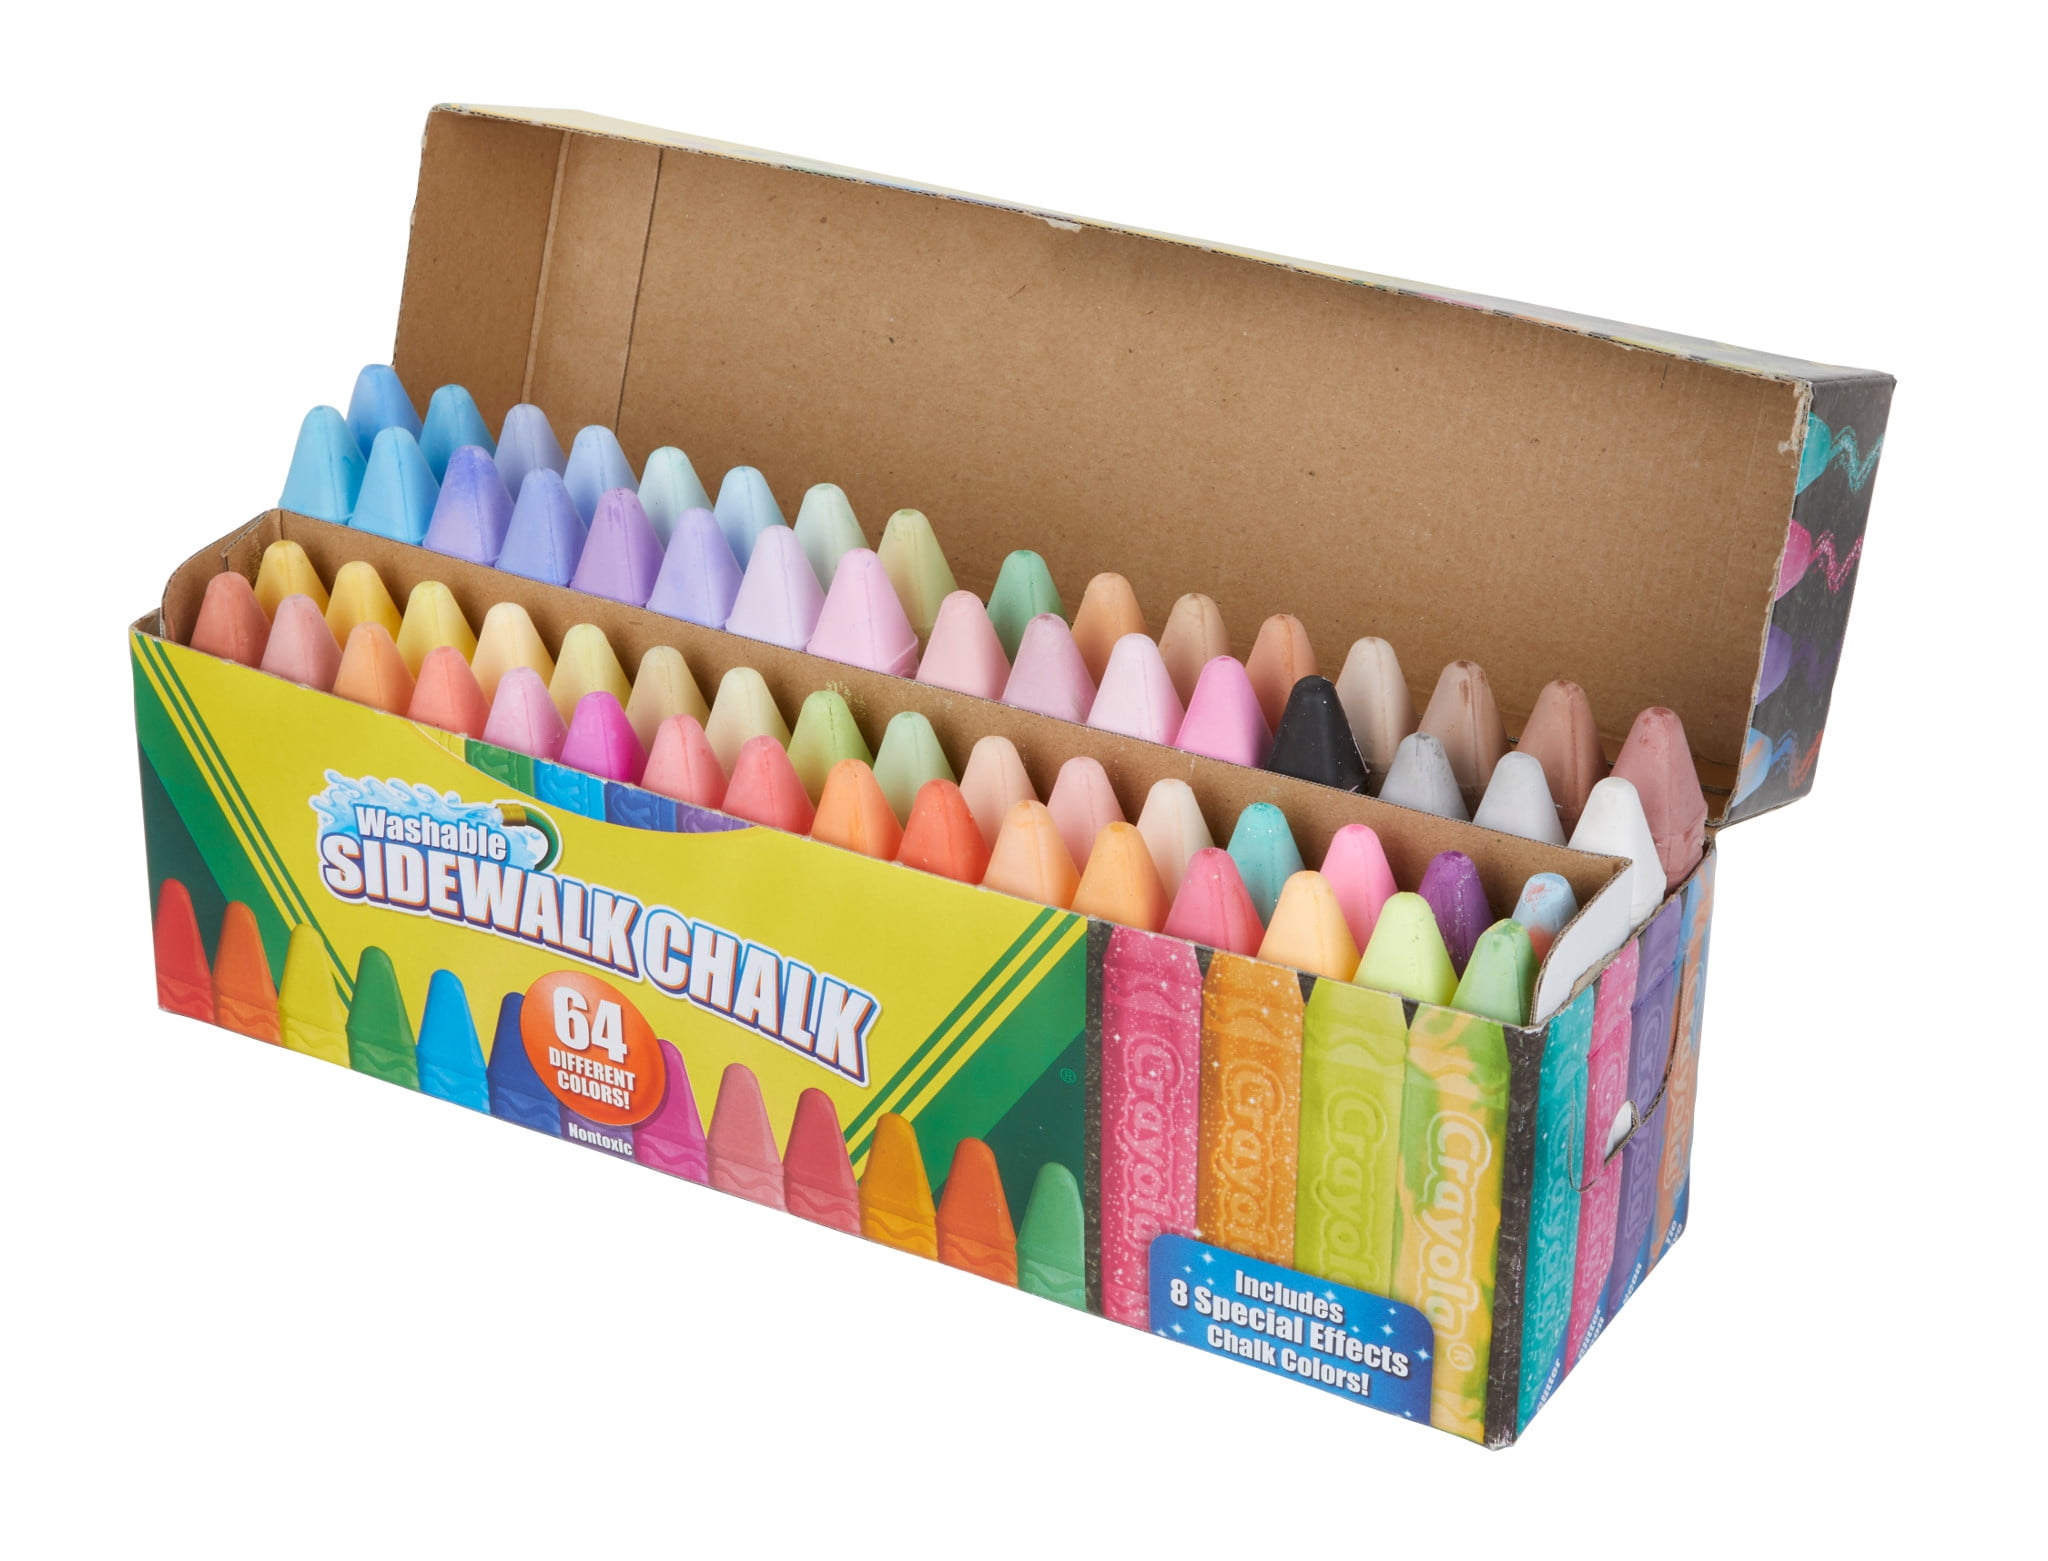 Crayola Sidewalk Chalk Outdoor Gifts for Kids 64 Count Washable 